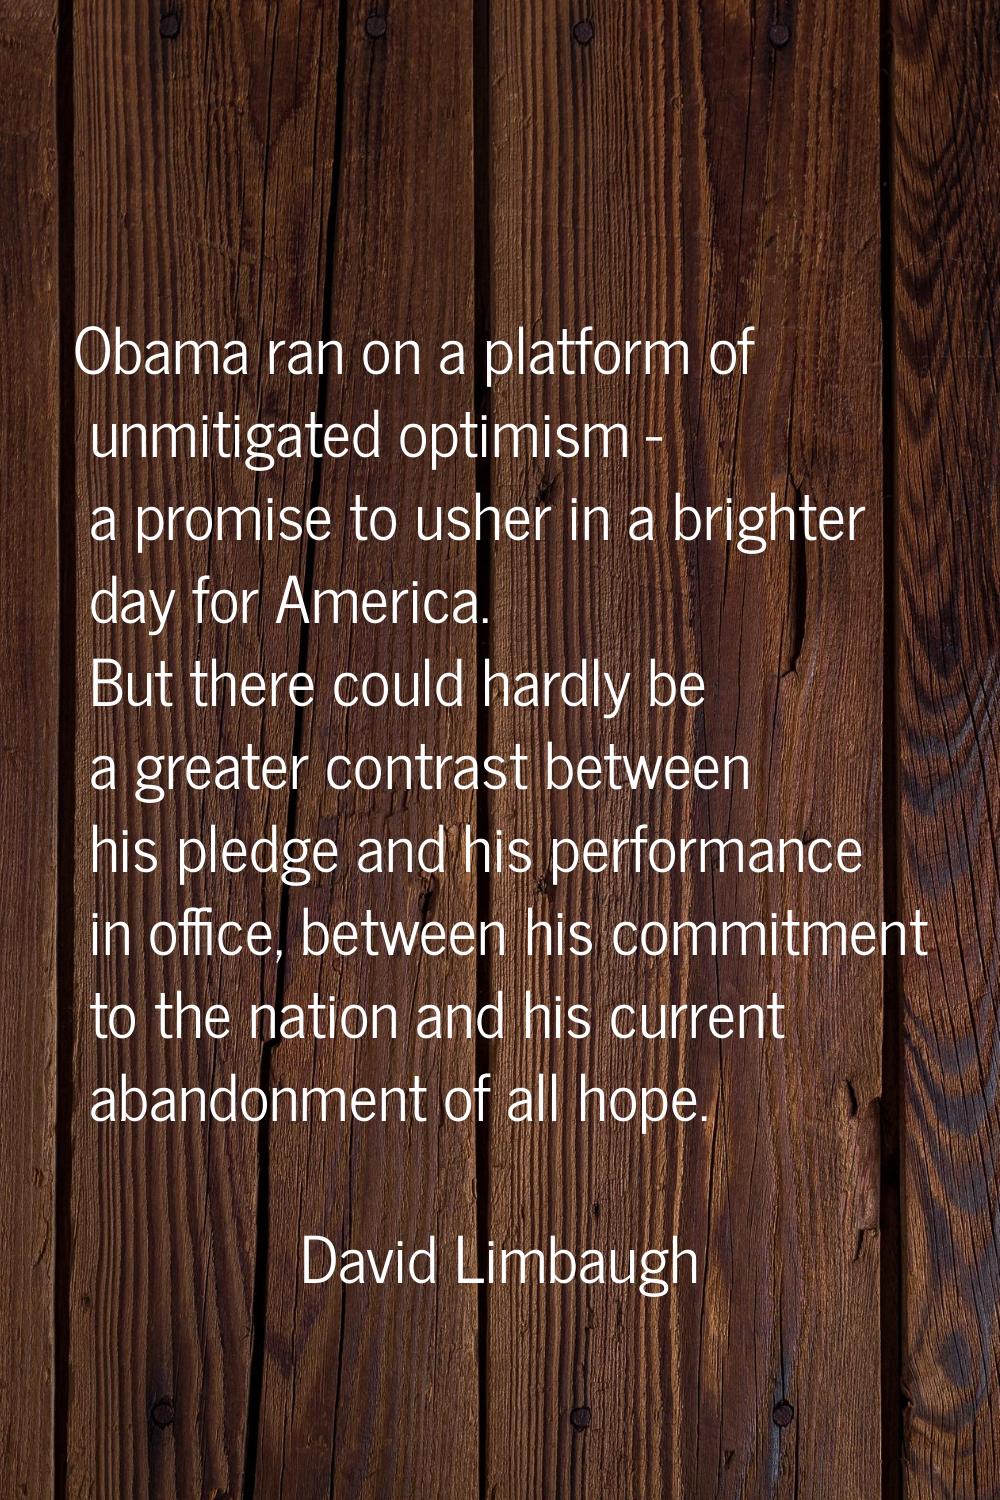 Obama ran on a platform of unmitigated optimism - a promise to usher in a brighter day for America.